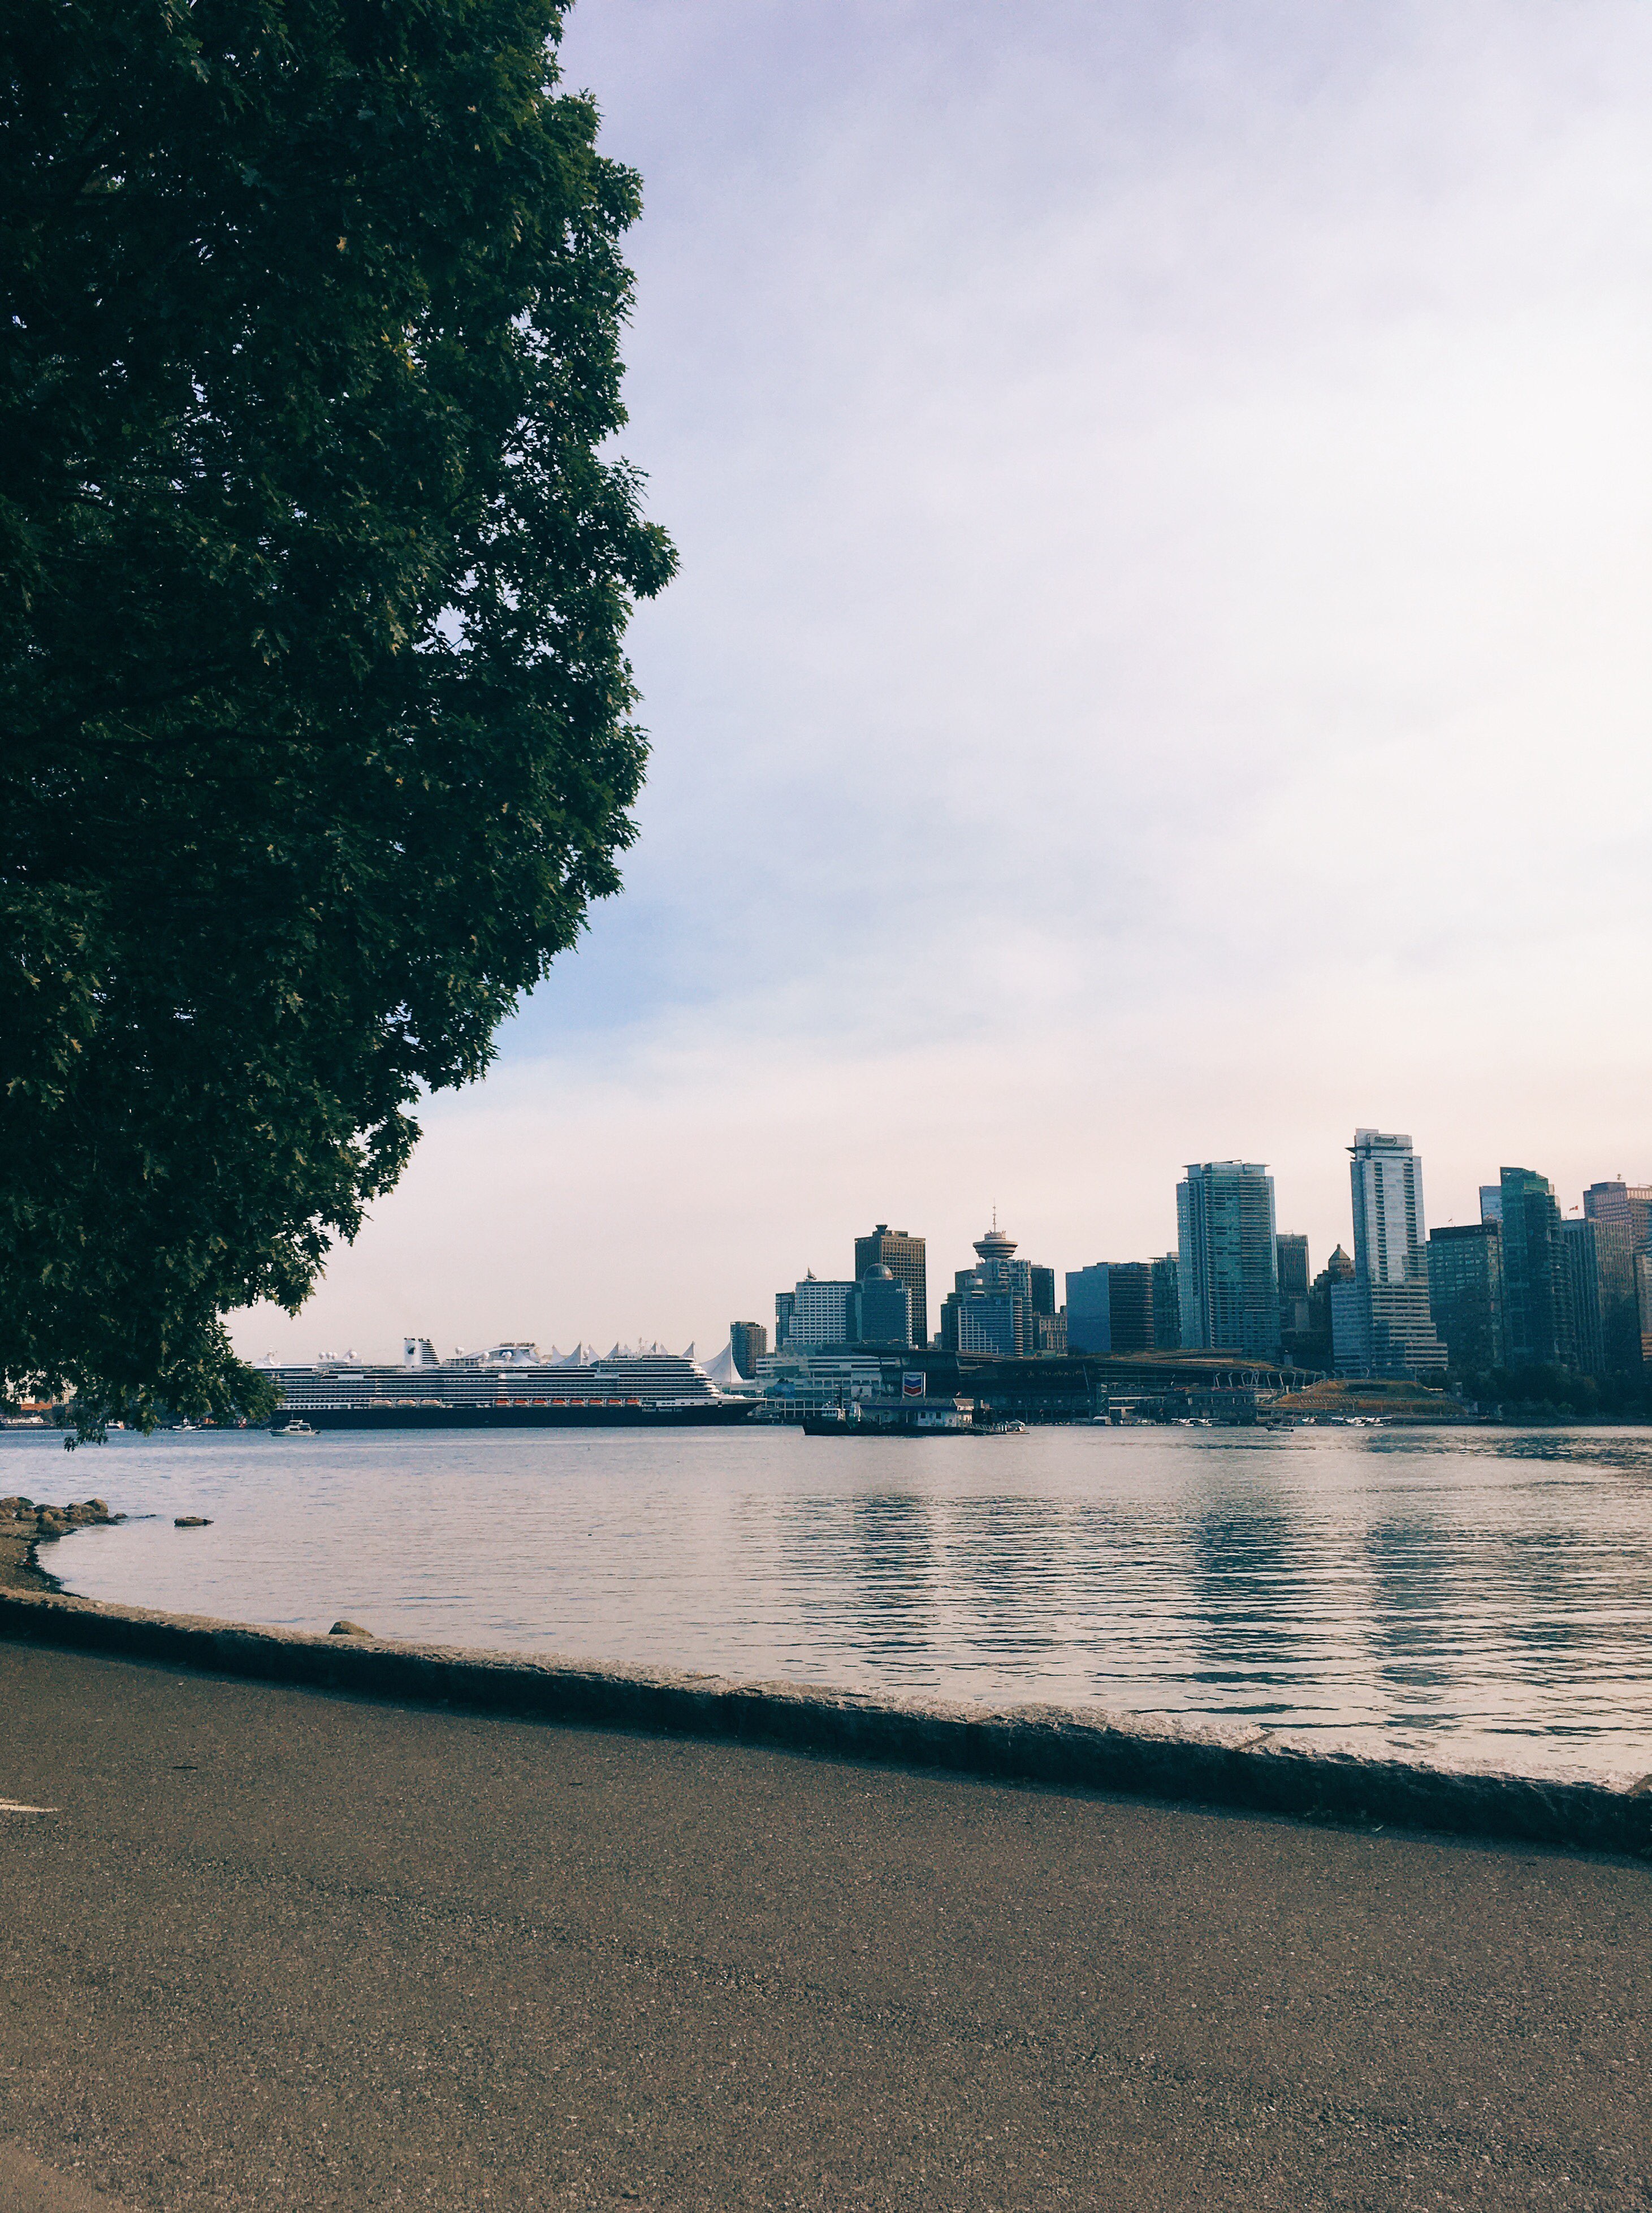 A waterfront bike path, looking out at the Vancouver cityscape across the water.